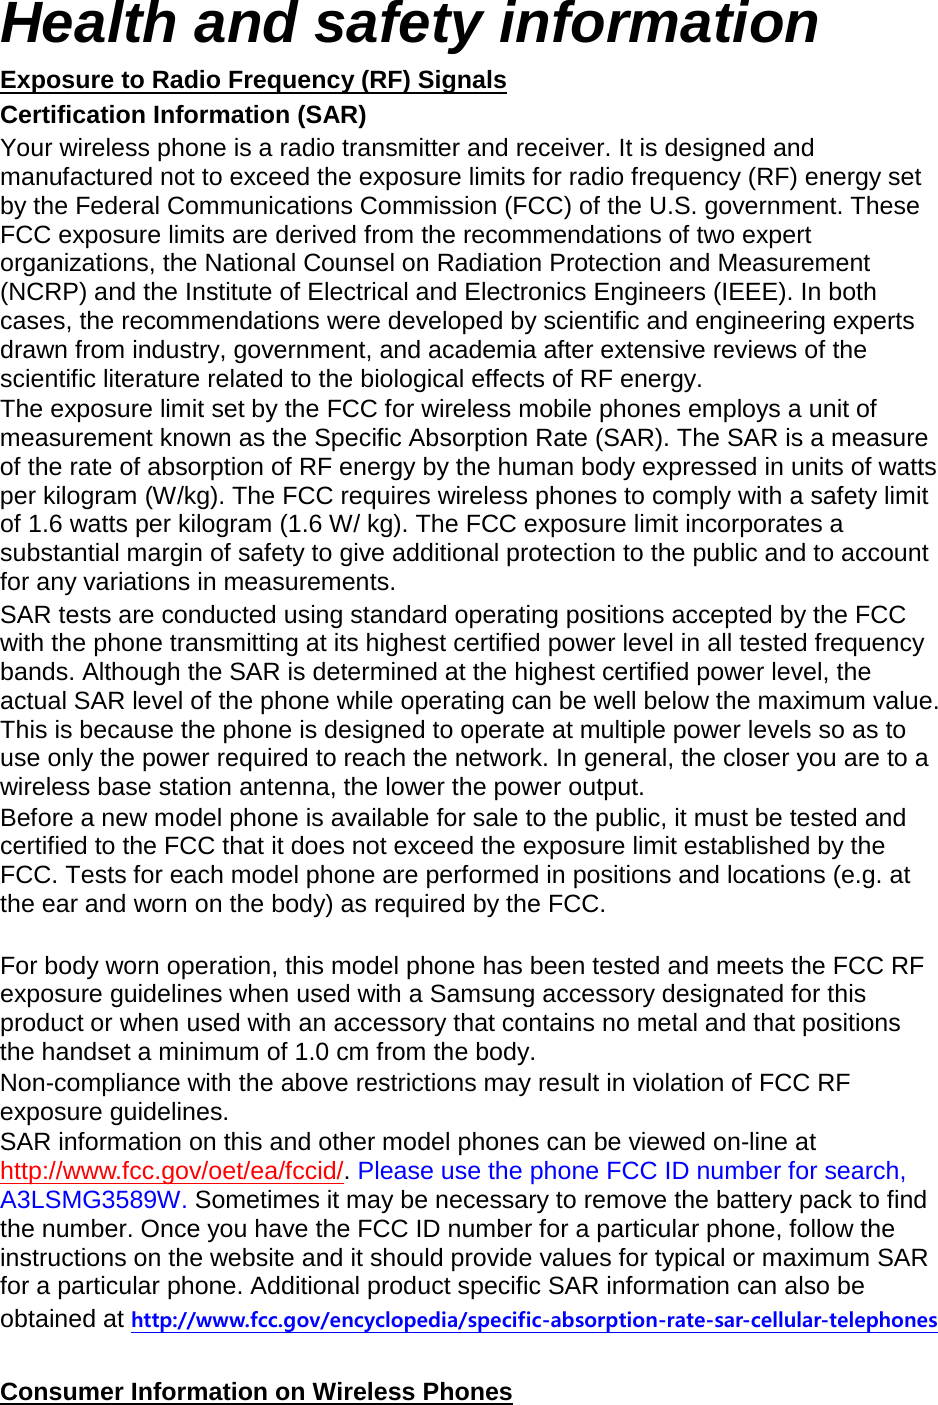 Health and safety information Exposure to Radio Frequency (RF) Signals Certification Information (SAR) Your wireless phone is a radio transmitter and receiver. It is designed and manufactured not to exceed the exposure limits for radio frequency (RF) energy set by the Federal Communications Commission (FCC) of the U.S. government. These FCC exposure limits are derived from the recommendations of two expert organizations, the National Counsel on Radiation Protection and Measurement (NCRP) and the Institute of Electrical and Electronics Engineers (IEEE). In both cases, the recommendations were developed by scientific and engineering experts drawn from industry, government, and academia after extensive reviews of the scientific literature related to the biological effects of RF energy. The exposure limit set by the FCC for wireless mobile phones employs a unit of measurement known as the Specific Absorption Rate (SAR). The SAR is a measure of the rate of absorption of RF energy by the human body expressed in units of watts per kilogram (W/kg). The FCC requires wireless phones to comply with a safety limit of 1.6 watts per kilogram (1.6 W/ kg). The FCC exposure limit incorporates a substantial margin of safety to give additional protection to the public and to account for any variations in measurements. SAR tests are conducted using standard operating positions accepted by the FCC with the phone transmitting at its highest certified power level in all tested frequency bands. Although the SAR is determined at the highest certified power level, the actual SAR level of the phone while operating can be well below the maximum value. This is because the phone is designed to operate at multiple power levels so as to use only the power required to reach the network. In general, the closer you are to a wireless base station antenna, the lower the power output. Before a new model phone is available for sale to the public, it must be tested and certified to the FCC that it does not exceed the exposure limit established by the FCC. Tests for each model phone are performed in positions and locations (e.g. at the ear and worn on the body) as required by the FCC.      For body worn operation, this model phone has been tested and meets the FCC RF exposure guidelines when used with a Samsung accessory designated for this product or when used with an accessory that contains no metal and that positions the handset a minimum of 1.0 cm from the body.   Non-compliance with the above restrictions may result in violation of FCC RF exposure guidelines. SAR information on this and other model phones can be viewed on-line at http://www.fcc.gov/oet/ea/fccid/. Please use the phone FCC ID number for search, A3LSMG3589W. Sometimes it may be necessary to remove the battery pack to find the number. Once you have the FCC ID number for a particular phone, follow the instructions on the website and it should provide values for typical or maximum SAR for a particular phone. Additional product specific SAR information can also be obtained at http://www.fcc.gov/encyclopedia/specific-absorption-rate-sar-cellular-telephones  Consumer Information on Wireless Phones 